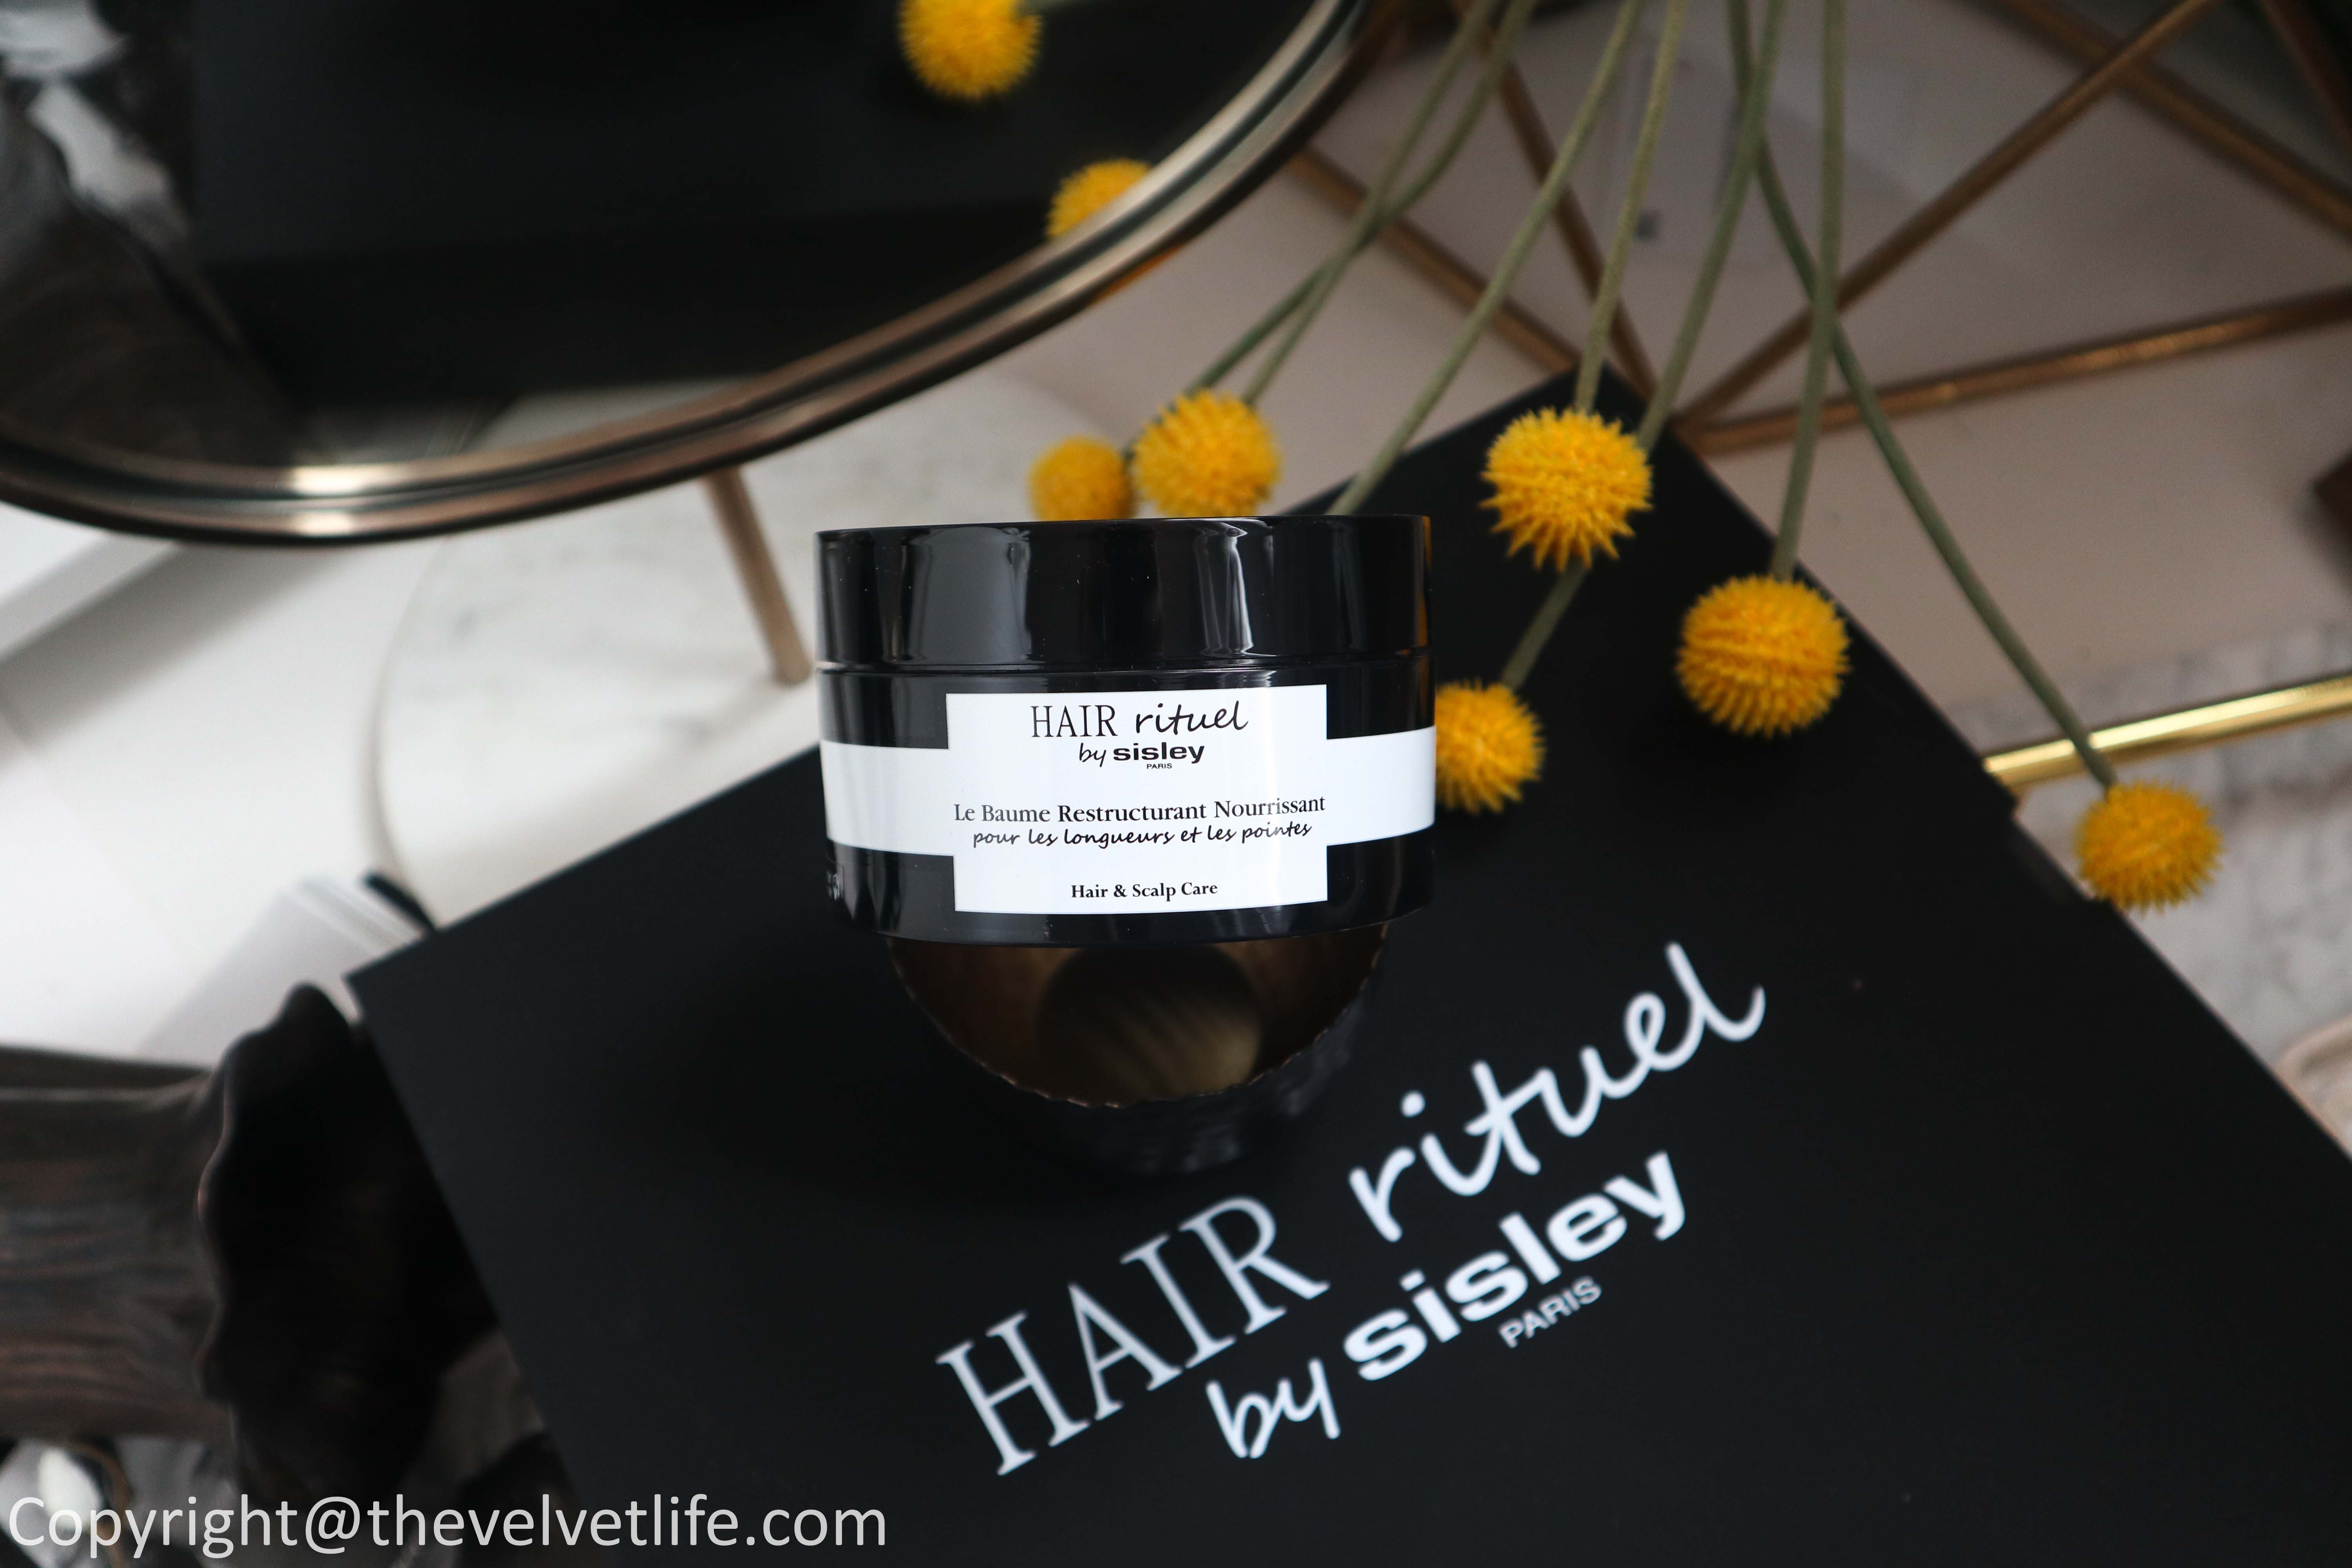 Hair Rituel by Sisley Paris new launches Restructuring Nourishing Balm, The Radiance Brush, The Blow-dry Brush 2 review